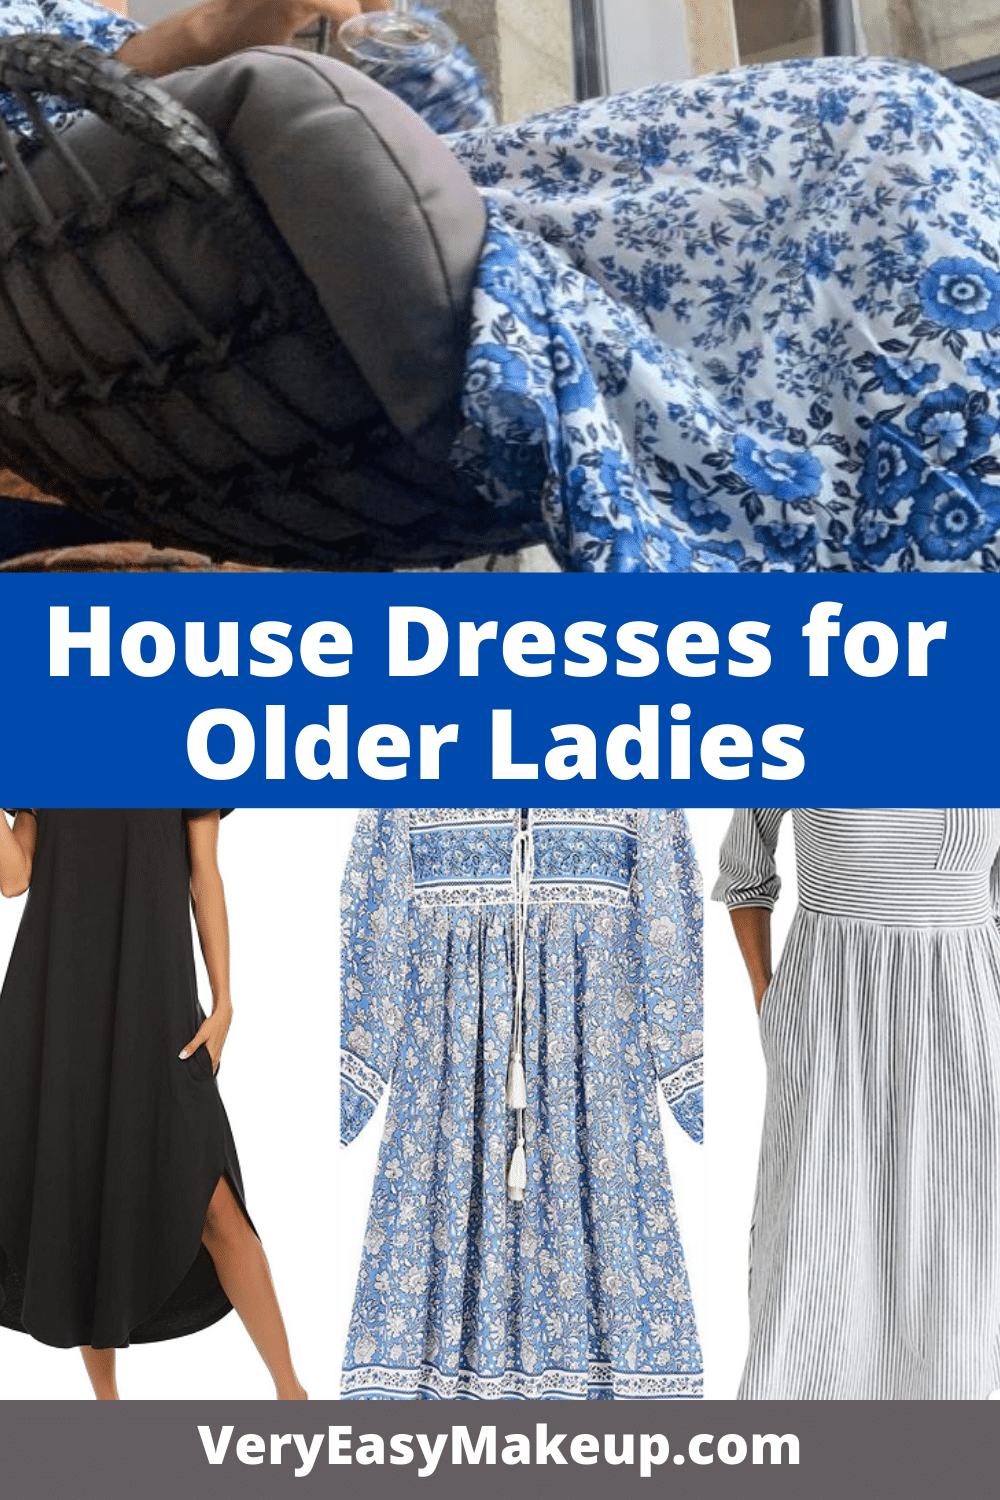 Comfy House Dresses for Older Ladies by Very Easy Makeup